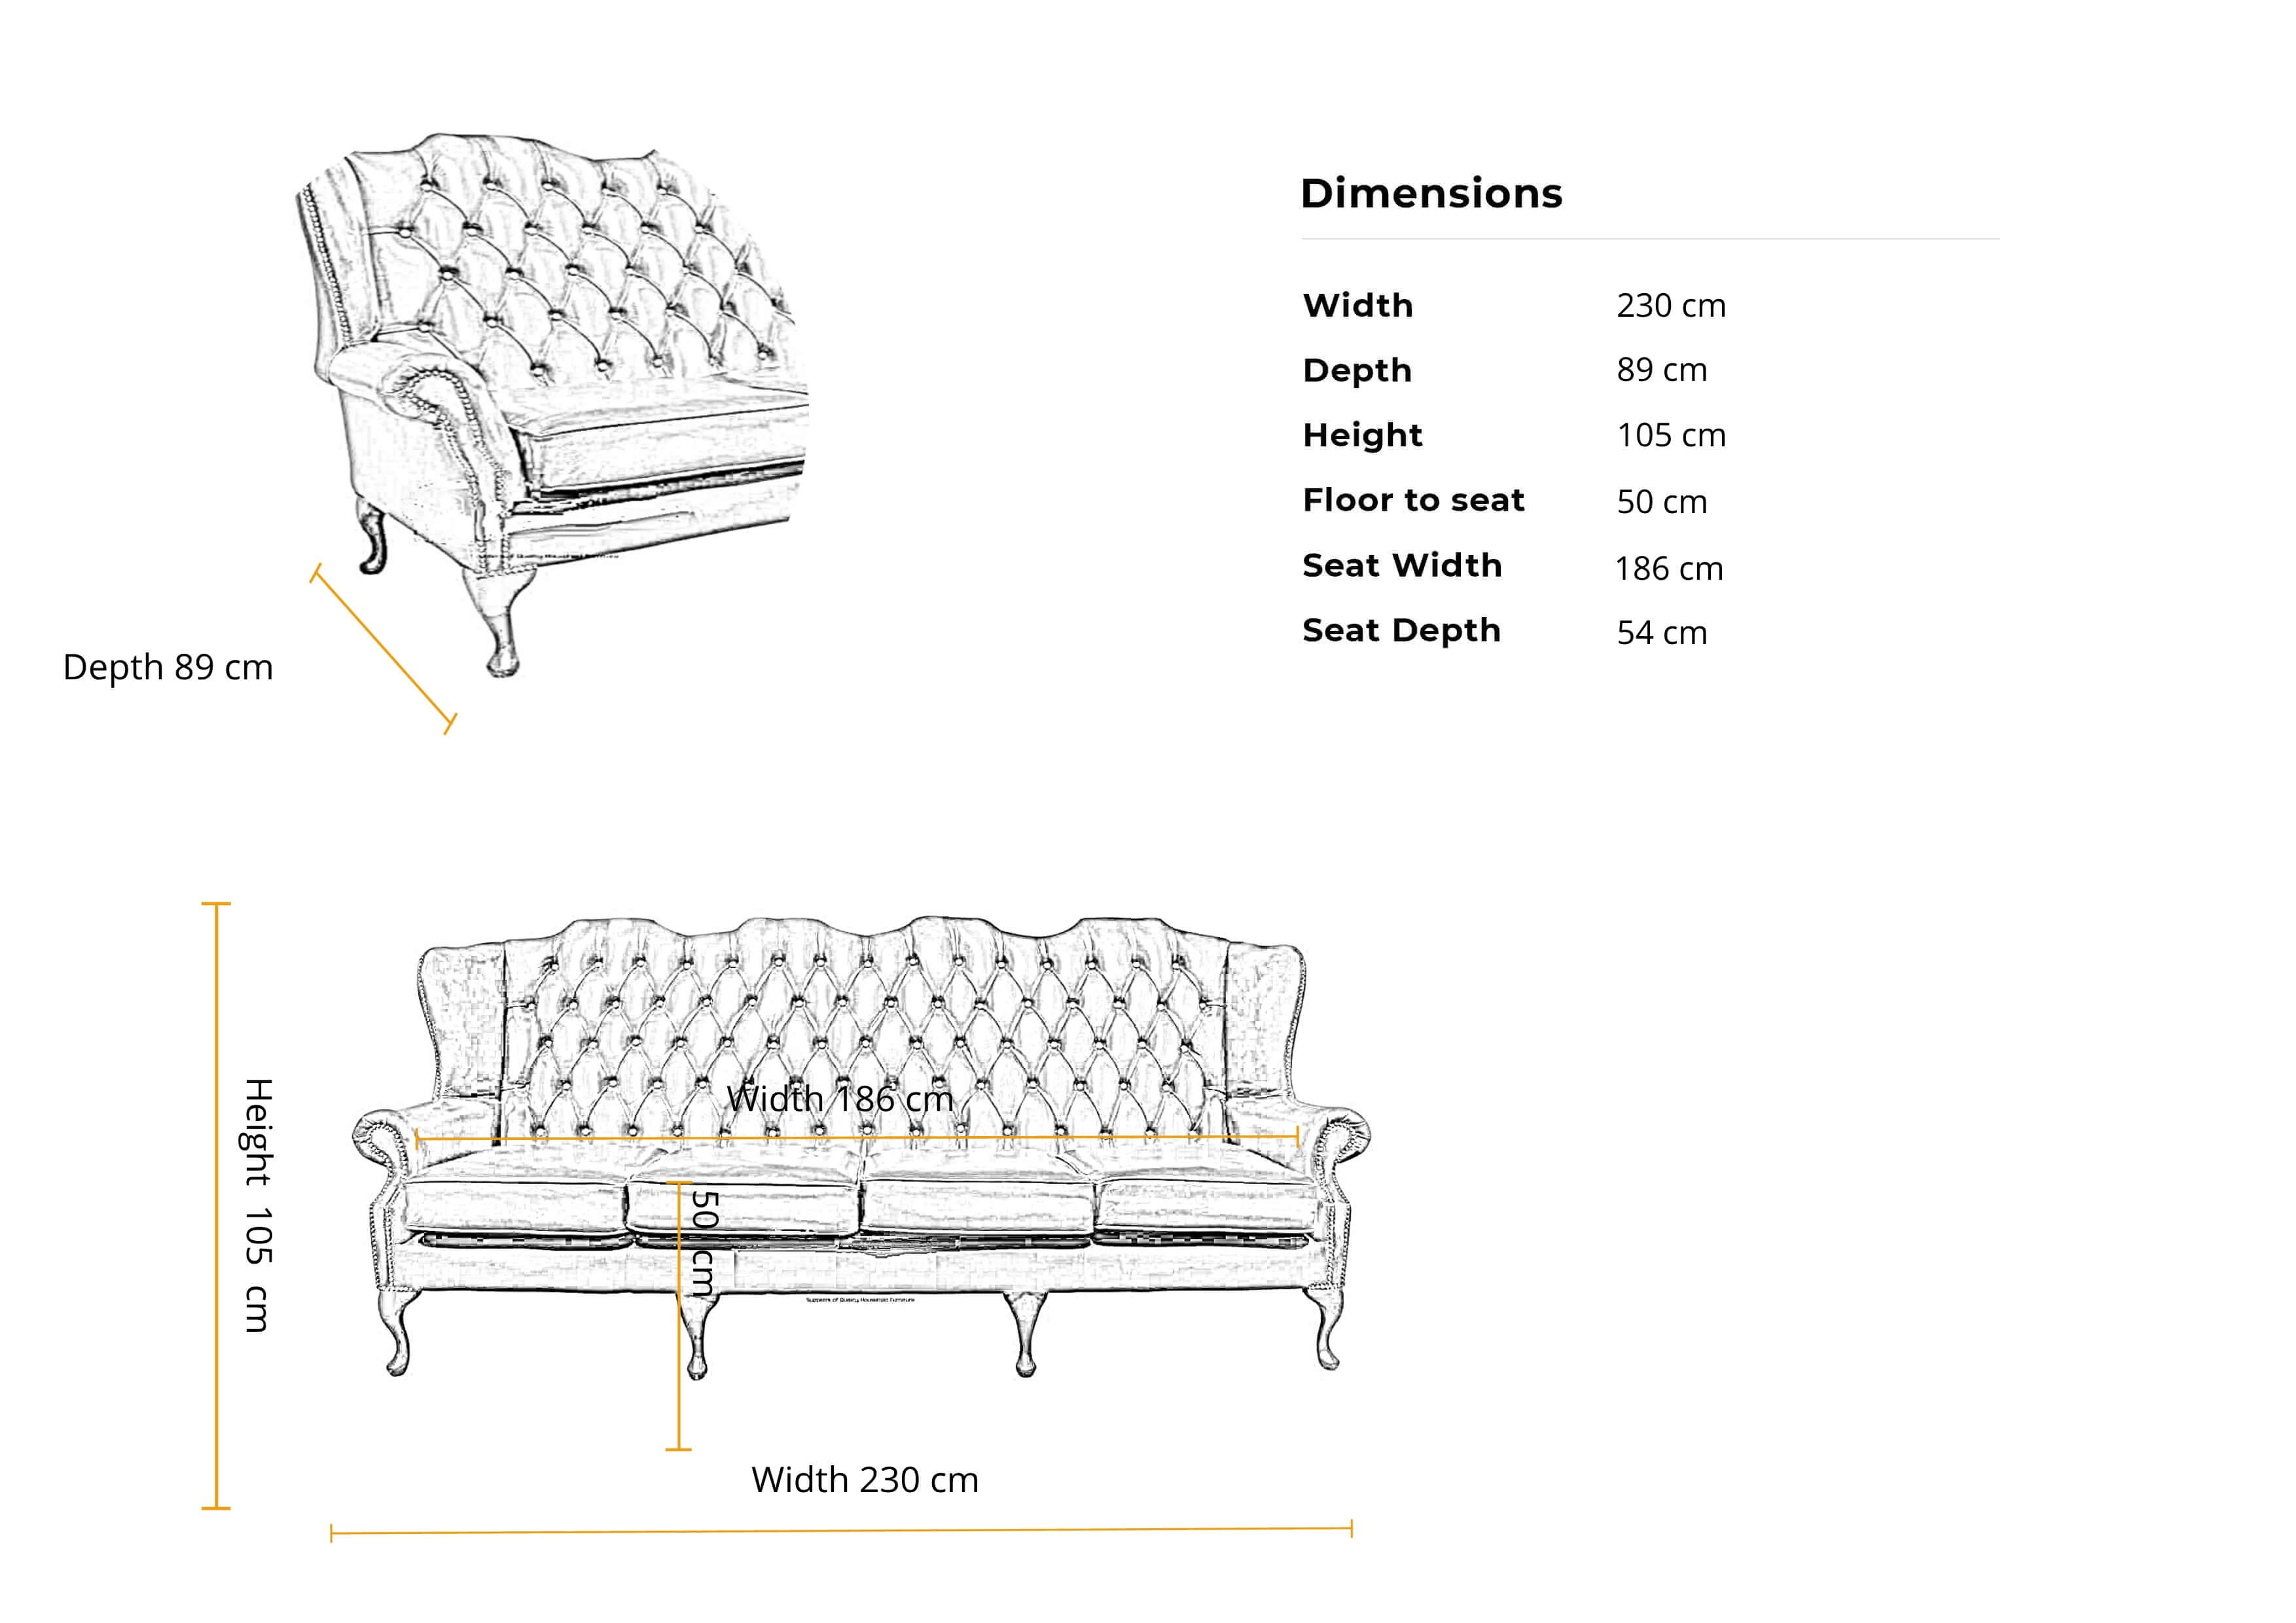 dimensions 4 Seater Flat Wing Queen Anne High Back Wing Sofa